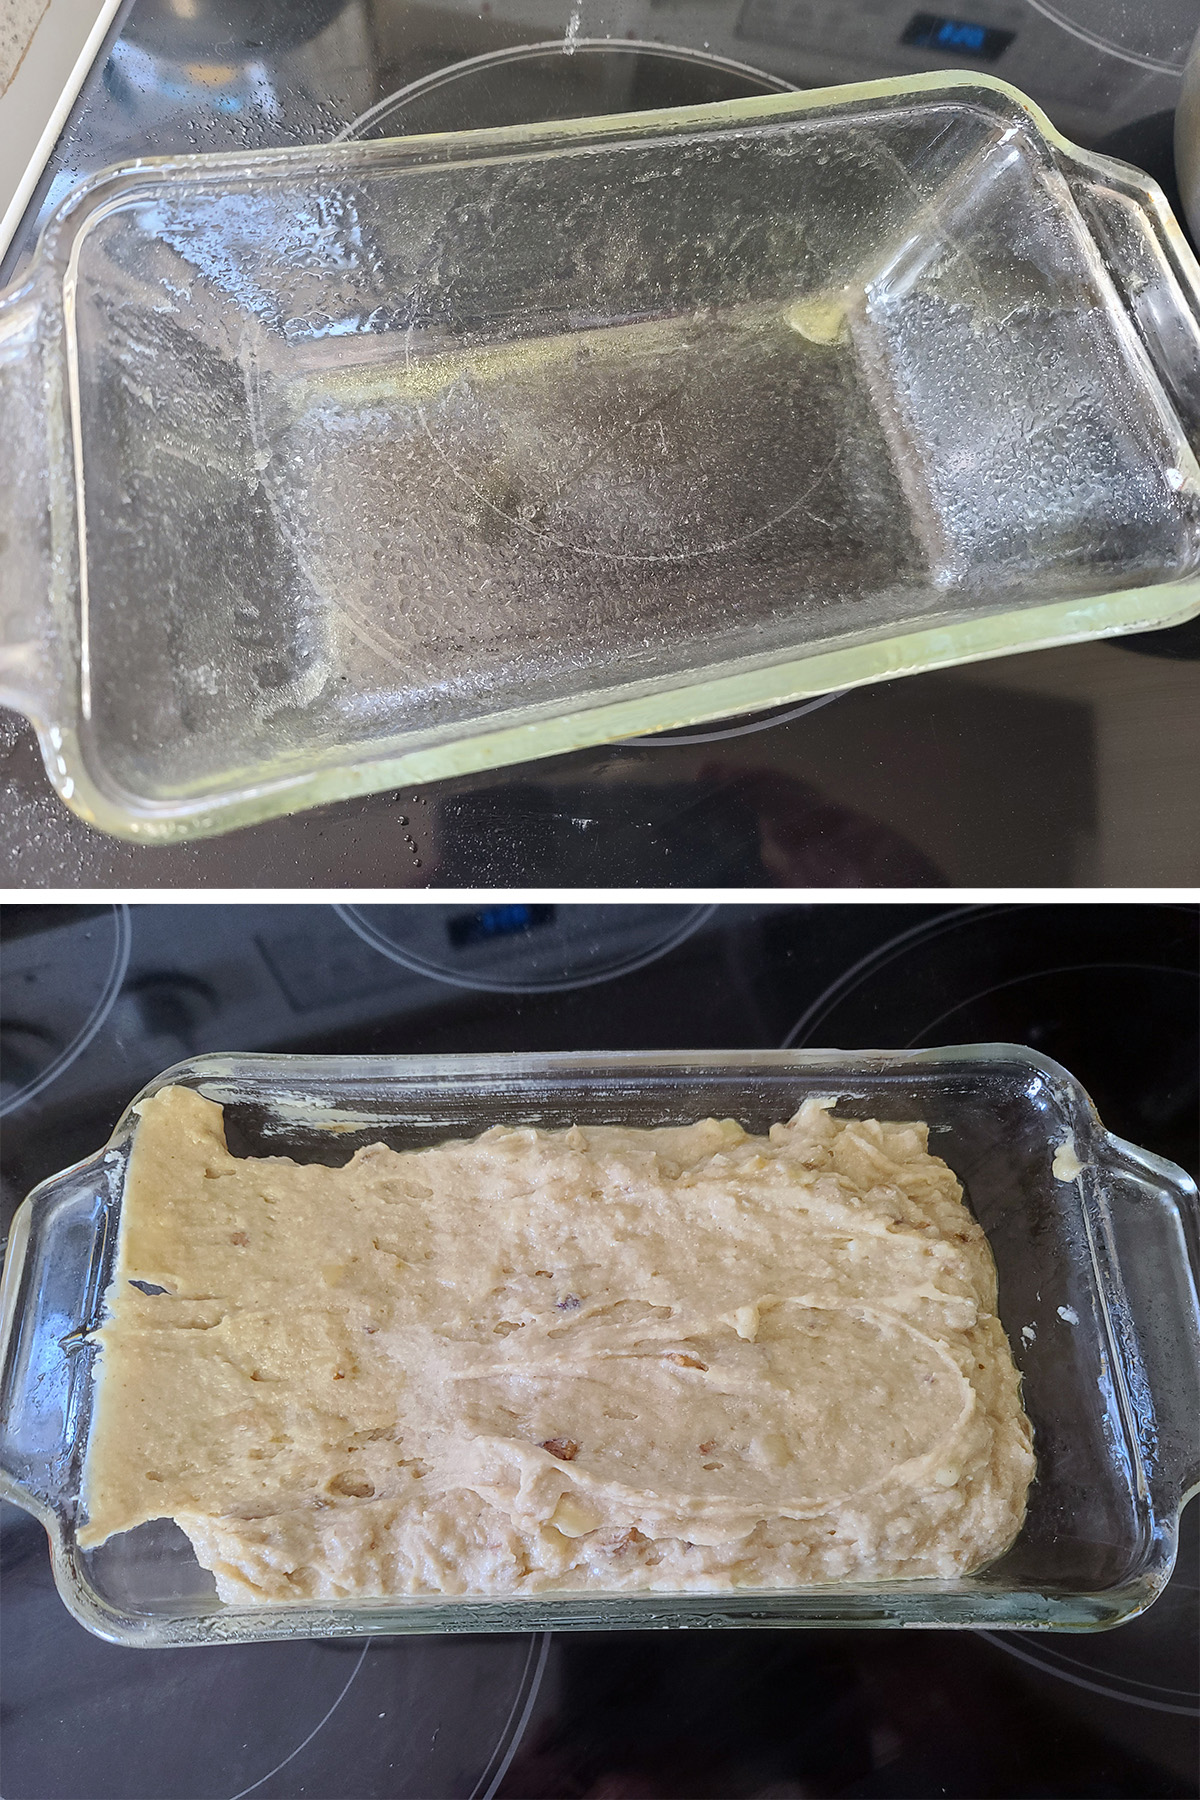 A 2 part image showing the prepared loaf pan, and the same loaf pan filled with banana bread batter.